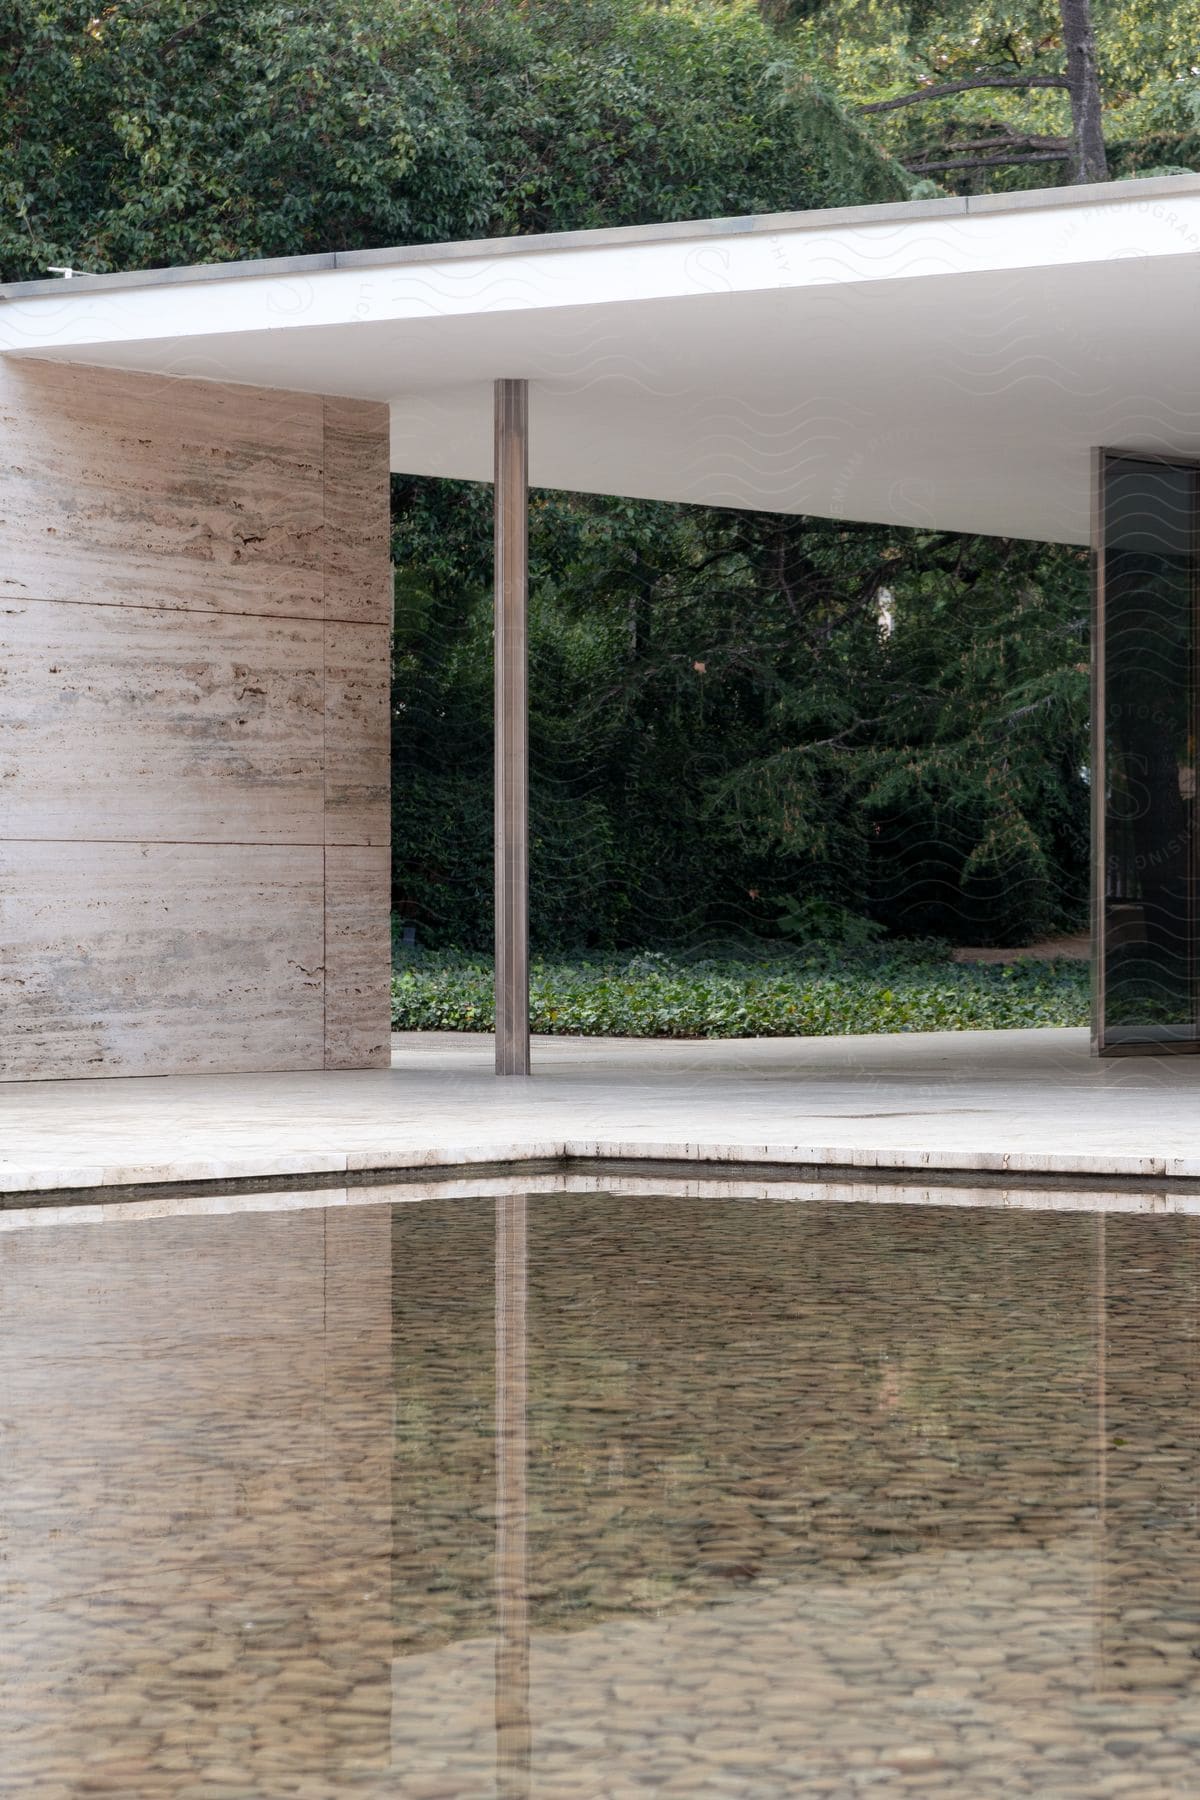 Modern architecture with a flat roof, supported by a column, overlooking a reflecting pool with a backdrop of trees.